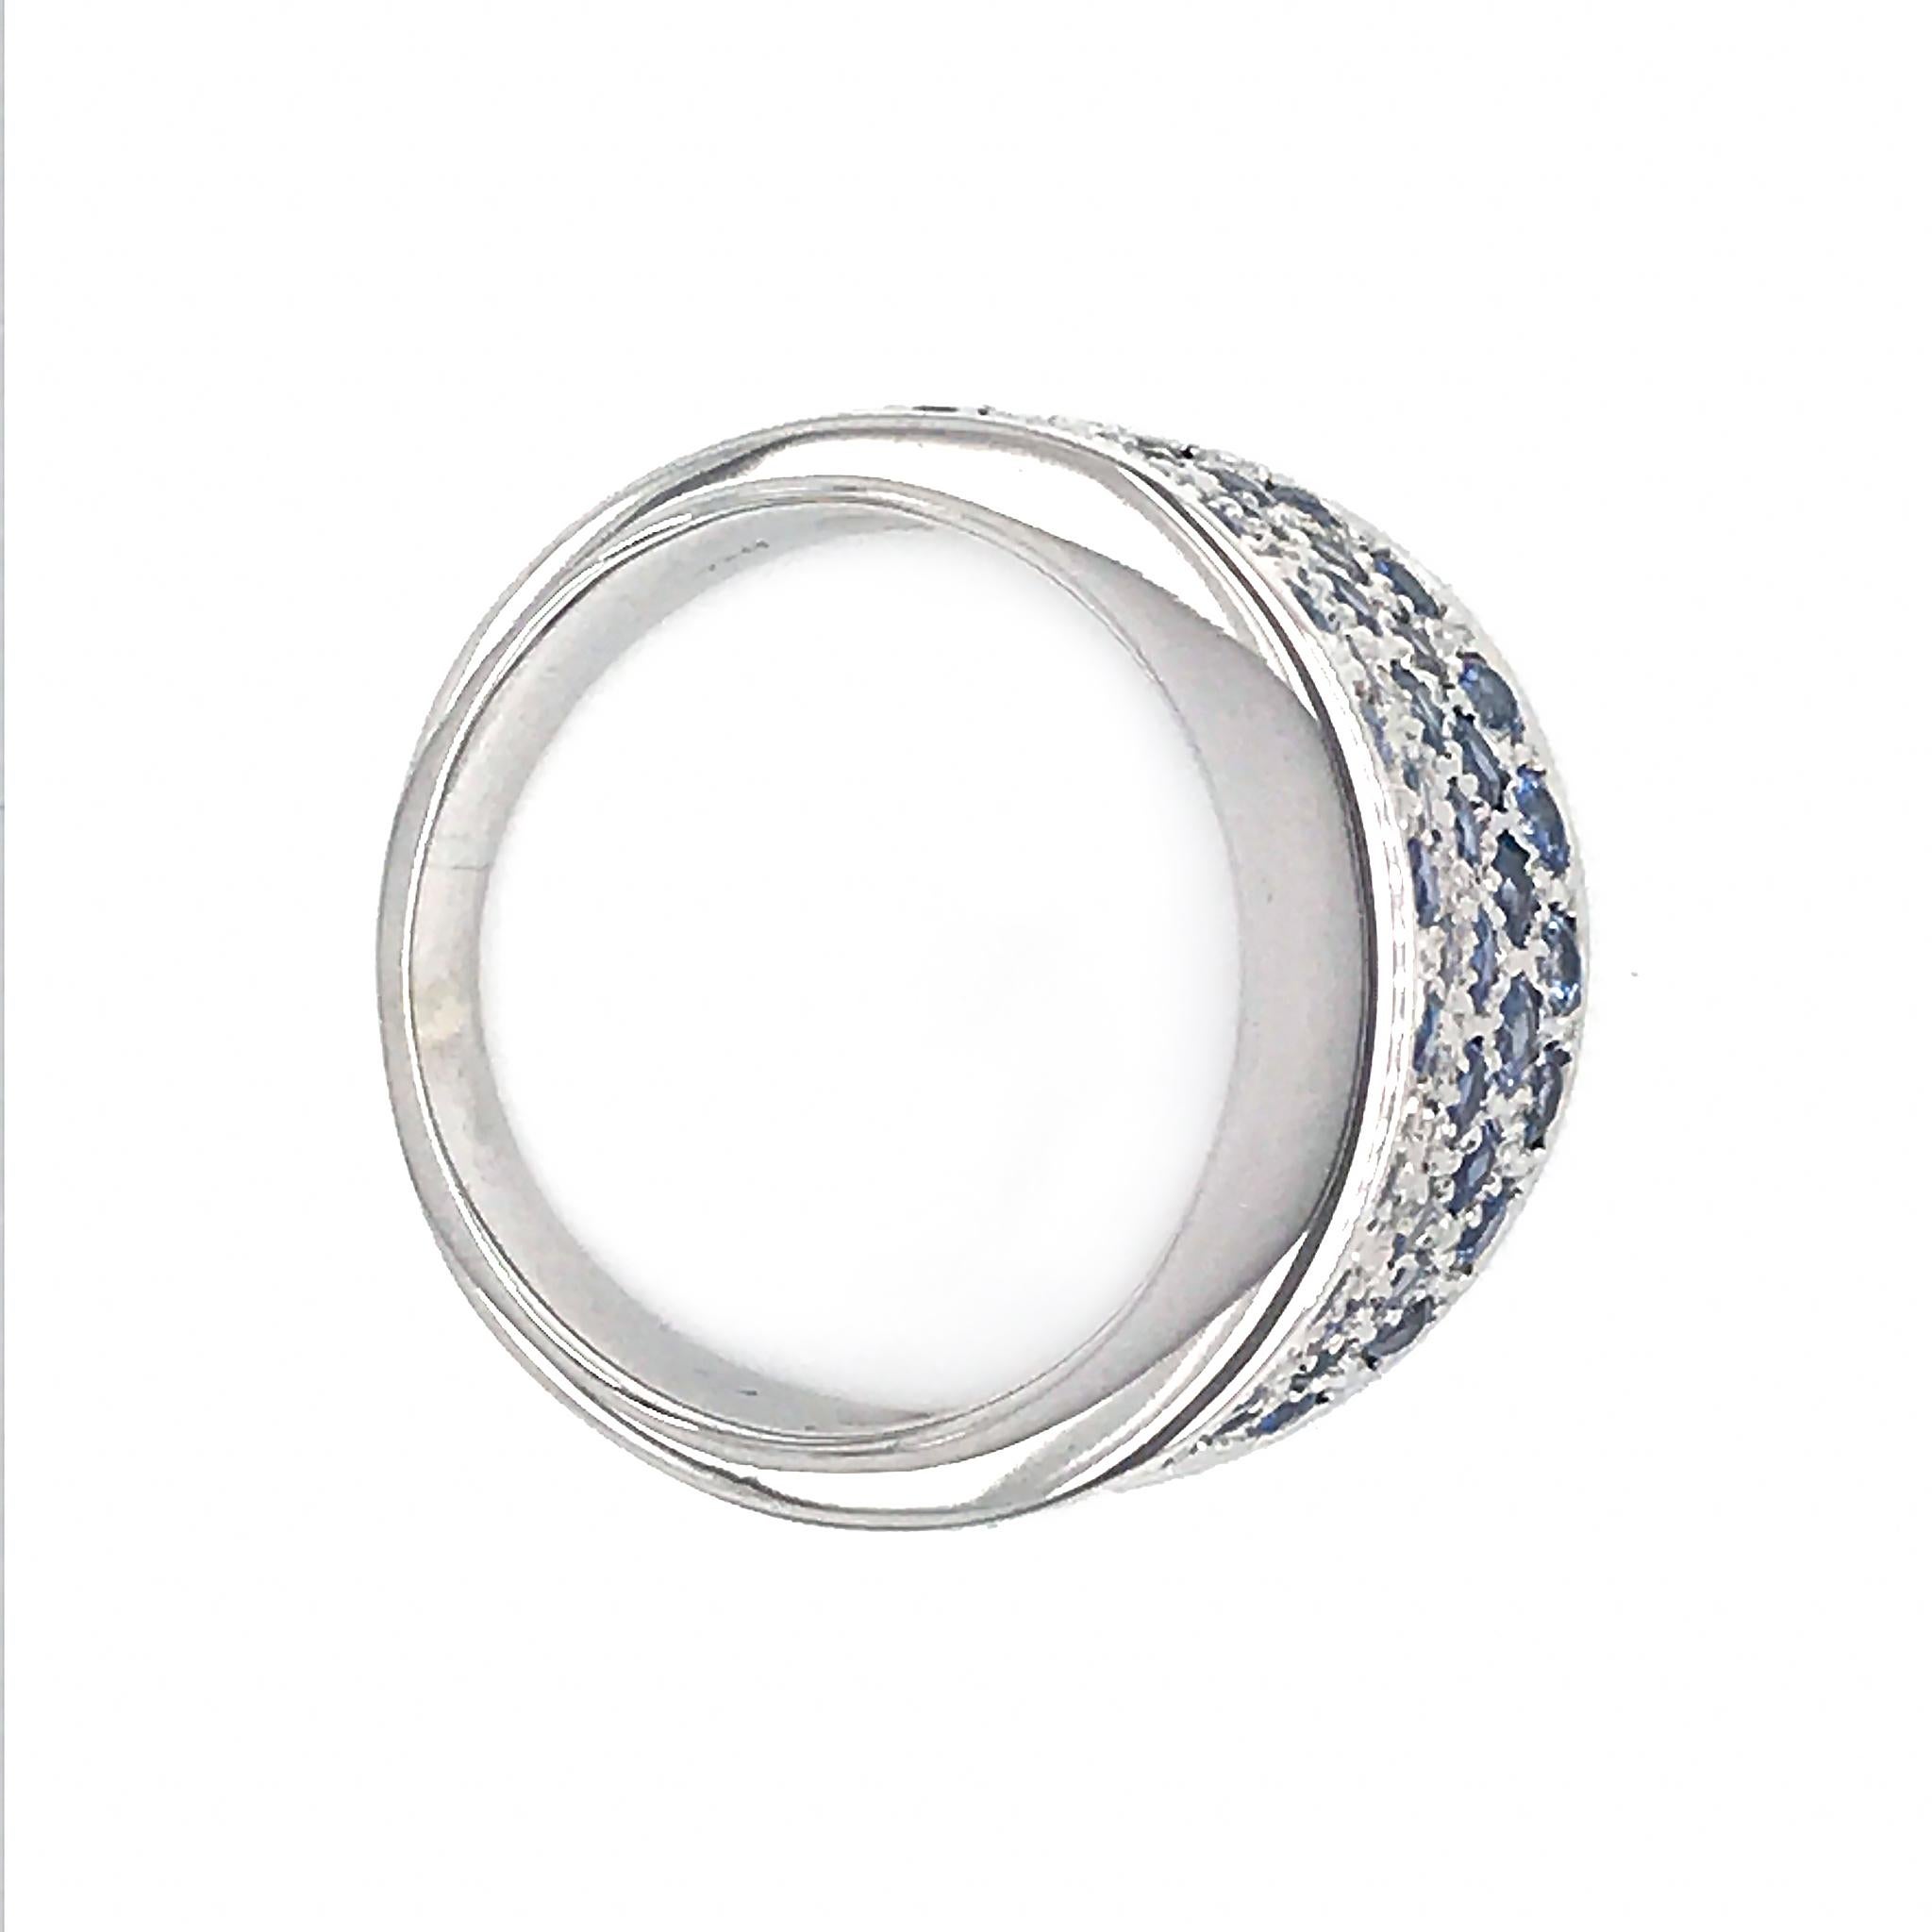 Round Cut 18 Karat White Gold Sapphire and Diamond Ring For Sale